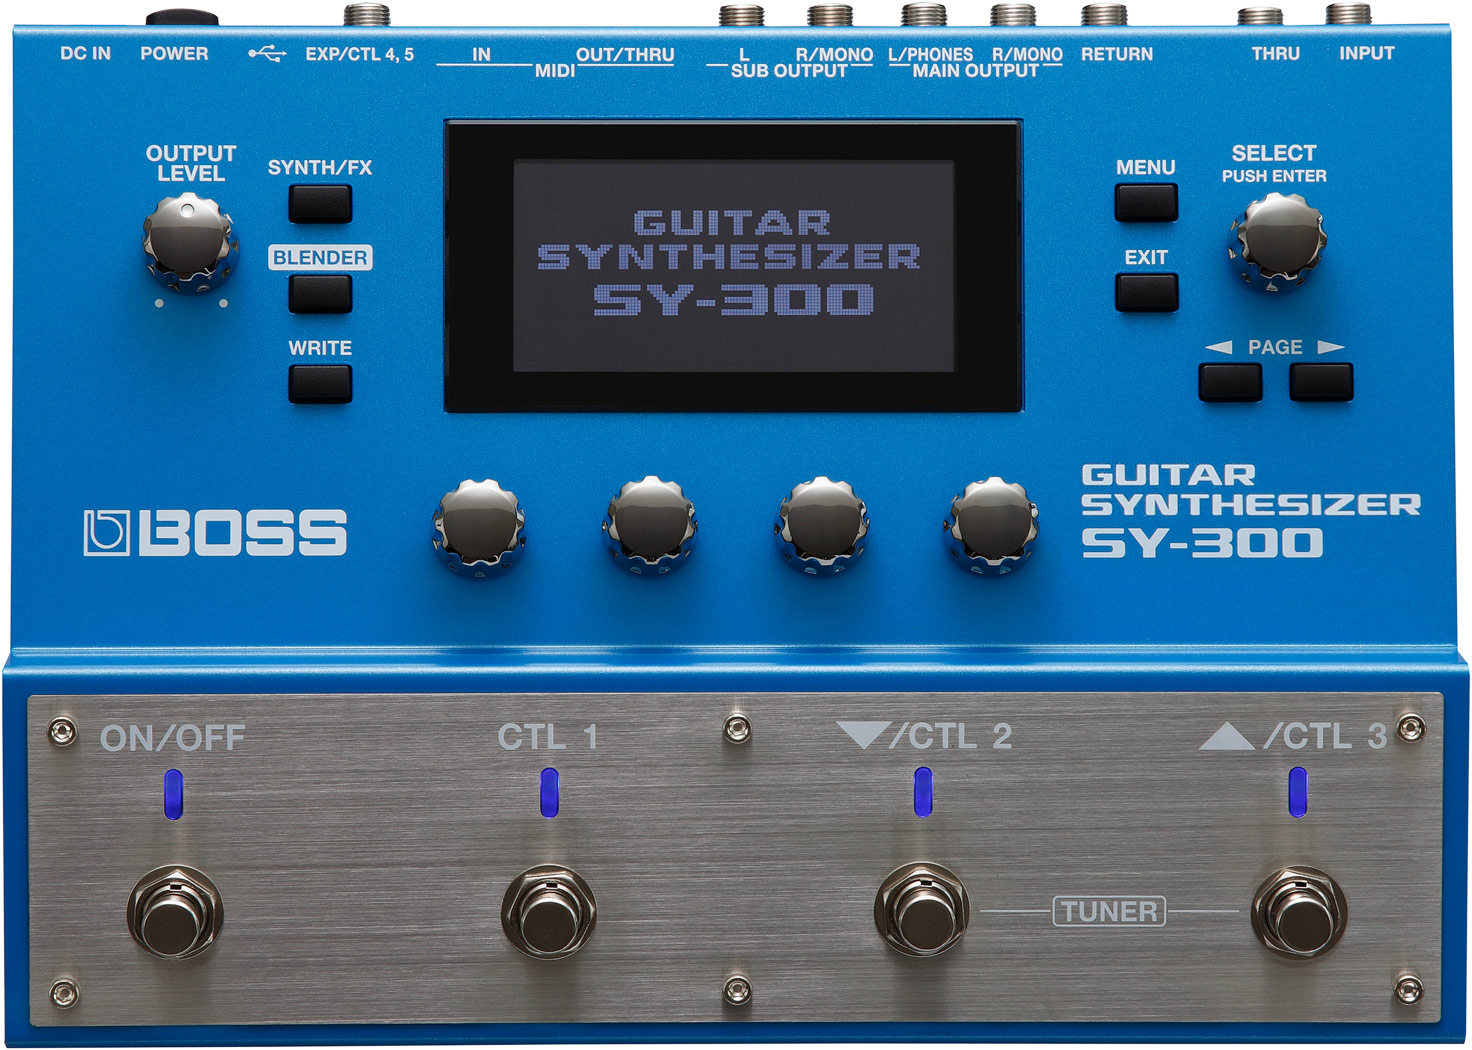 Boss SY300 guitar synth pedal